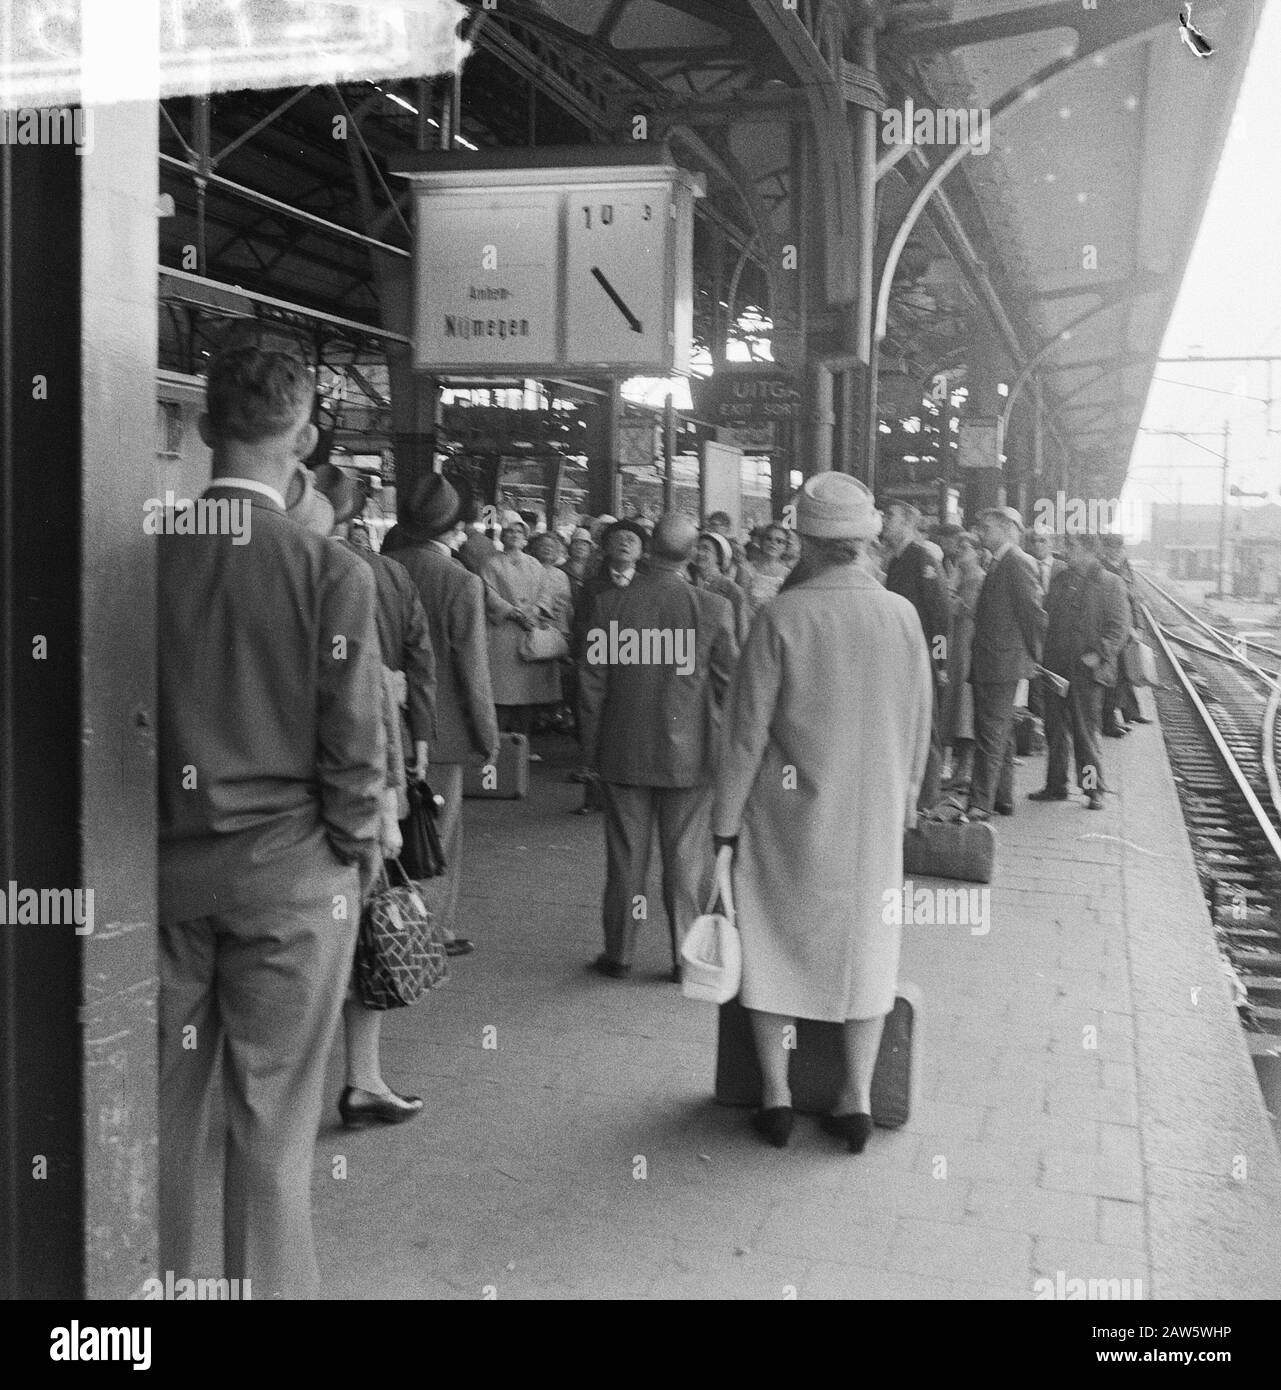 New Information Signs in Station Utrecht Date: July 8, 1961 Location: Utrecht Keywords: STATIONS Stock Photo